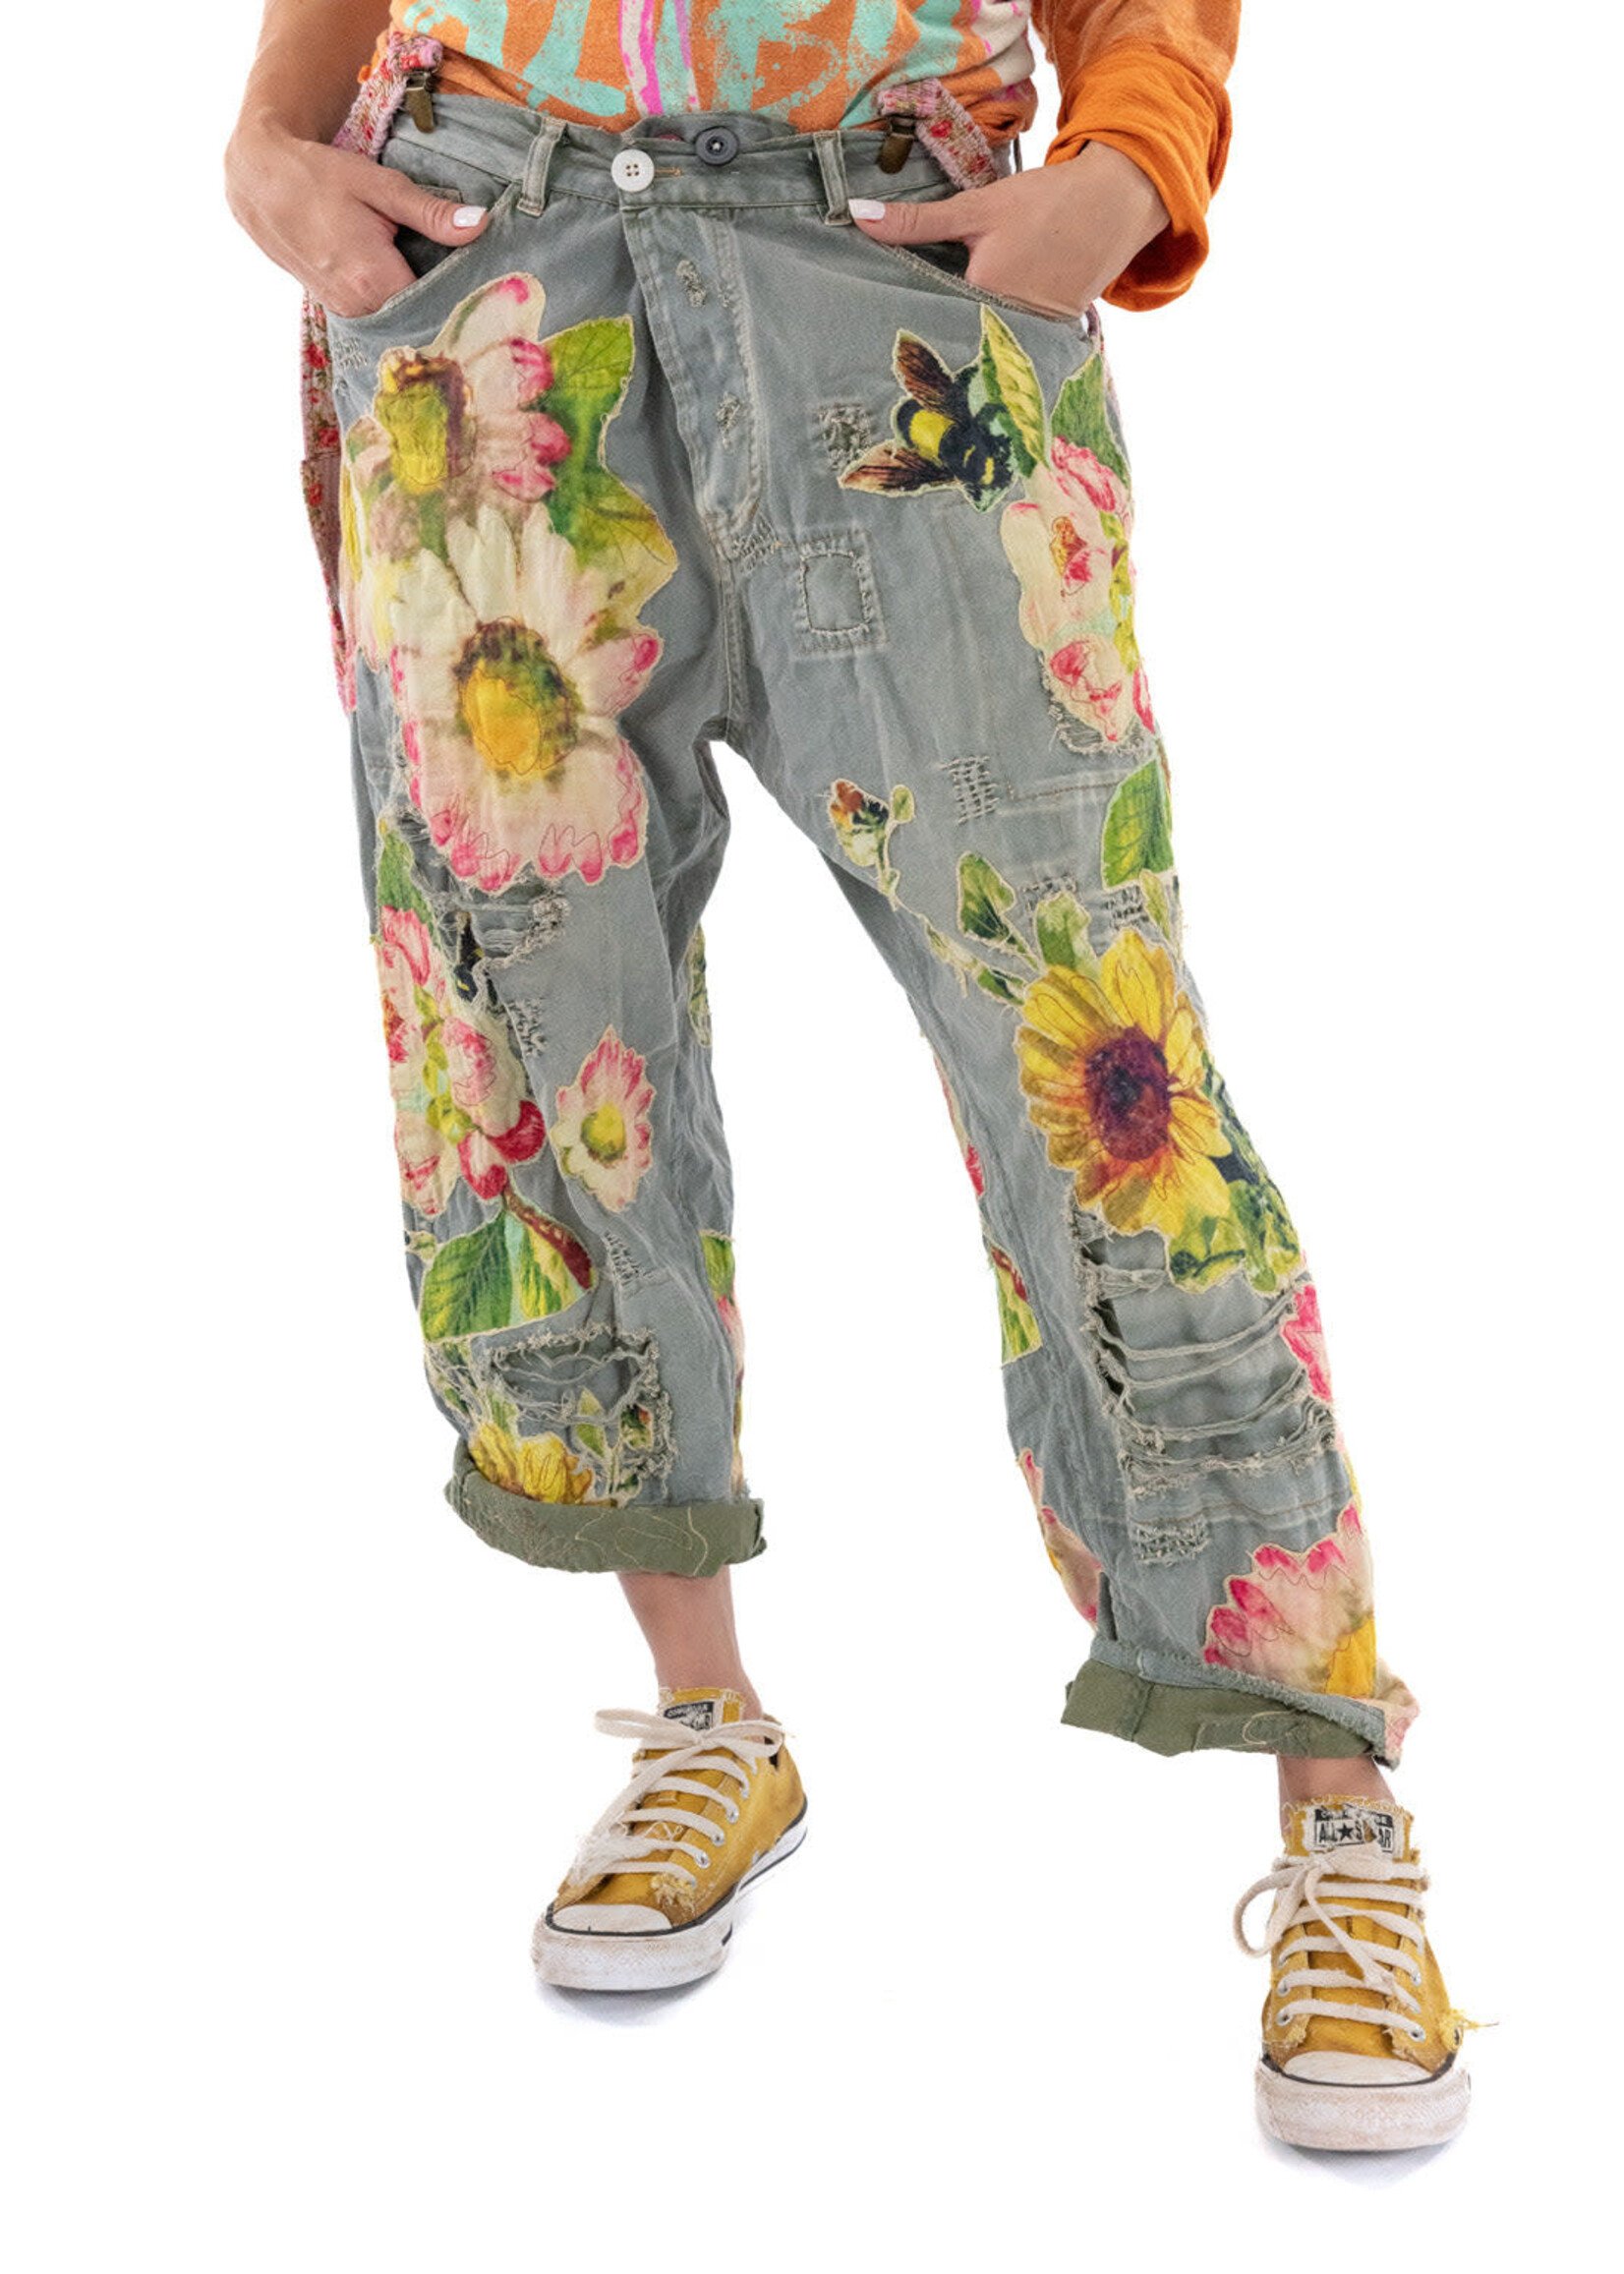 Magnolia Pearl Miners Pants with Sunflower (Ashbury Peace)